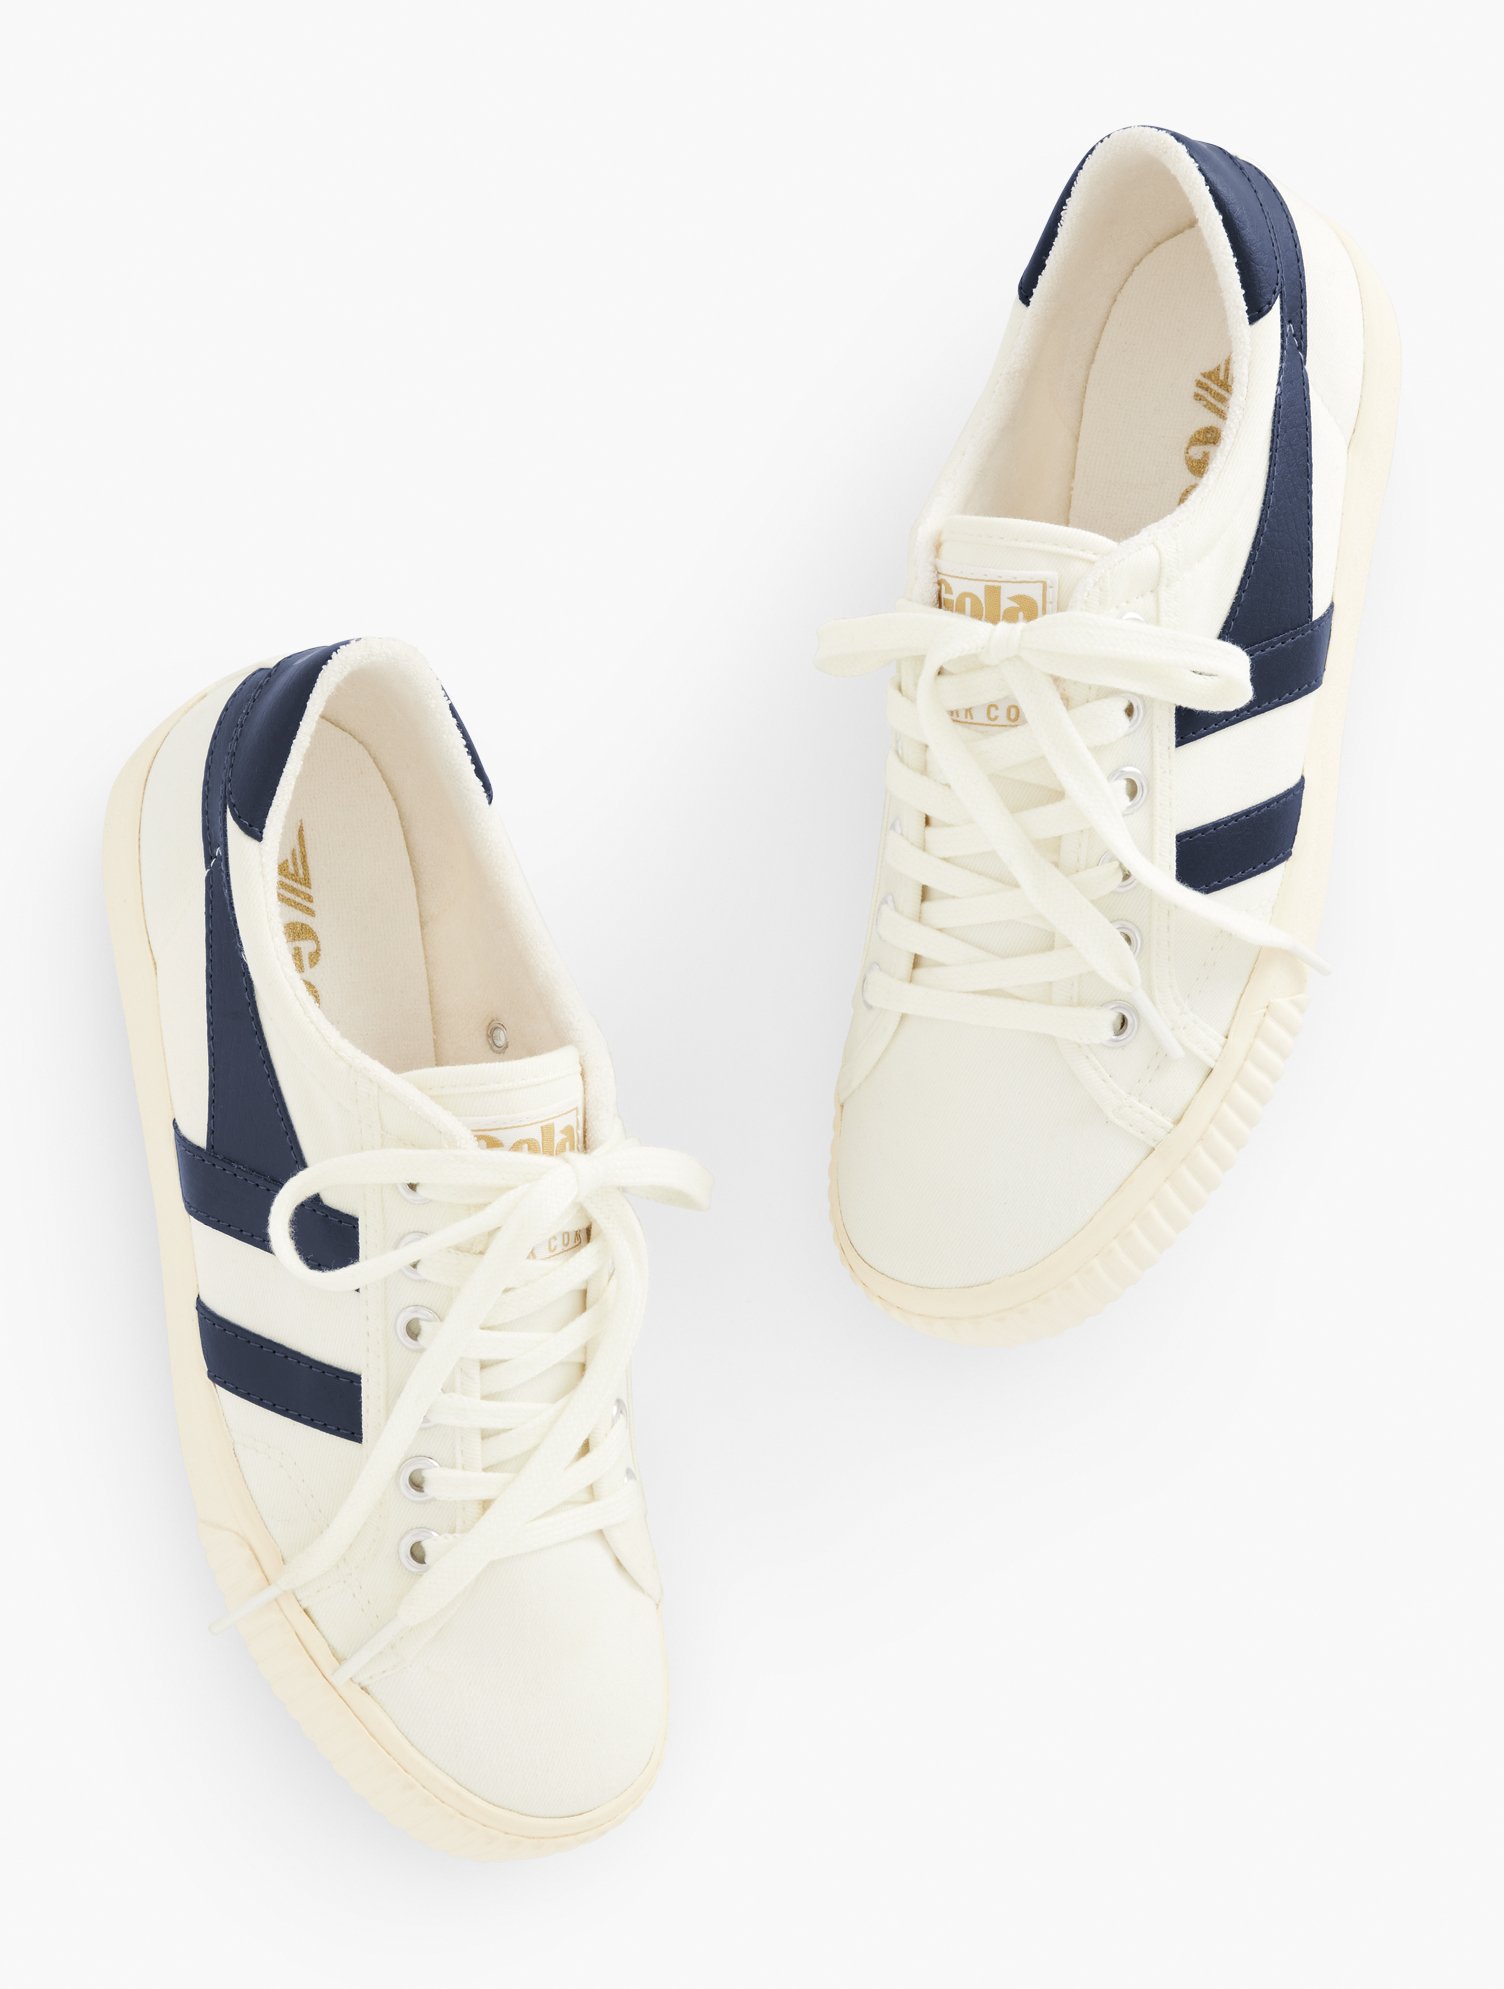 Talbots Golaâ® Mark Cox Tennis Sneakers - Off White/navy Blue - 10m - 100% Cotton  In Off White,navy Blue